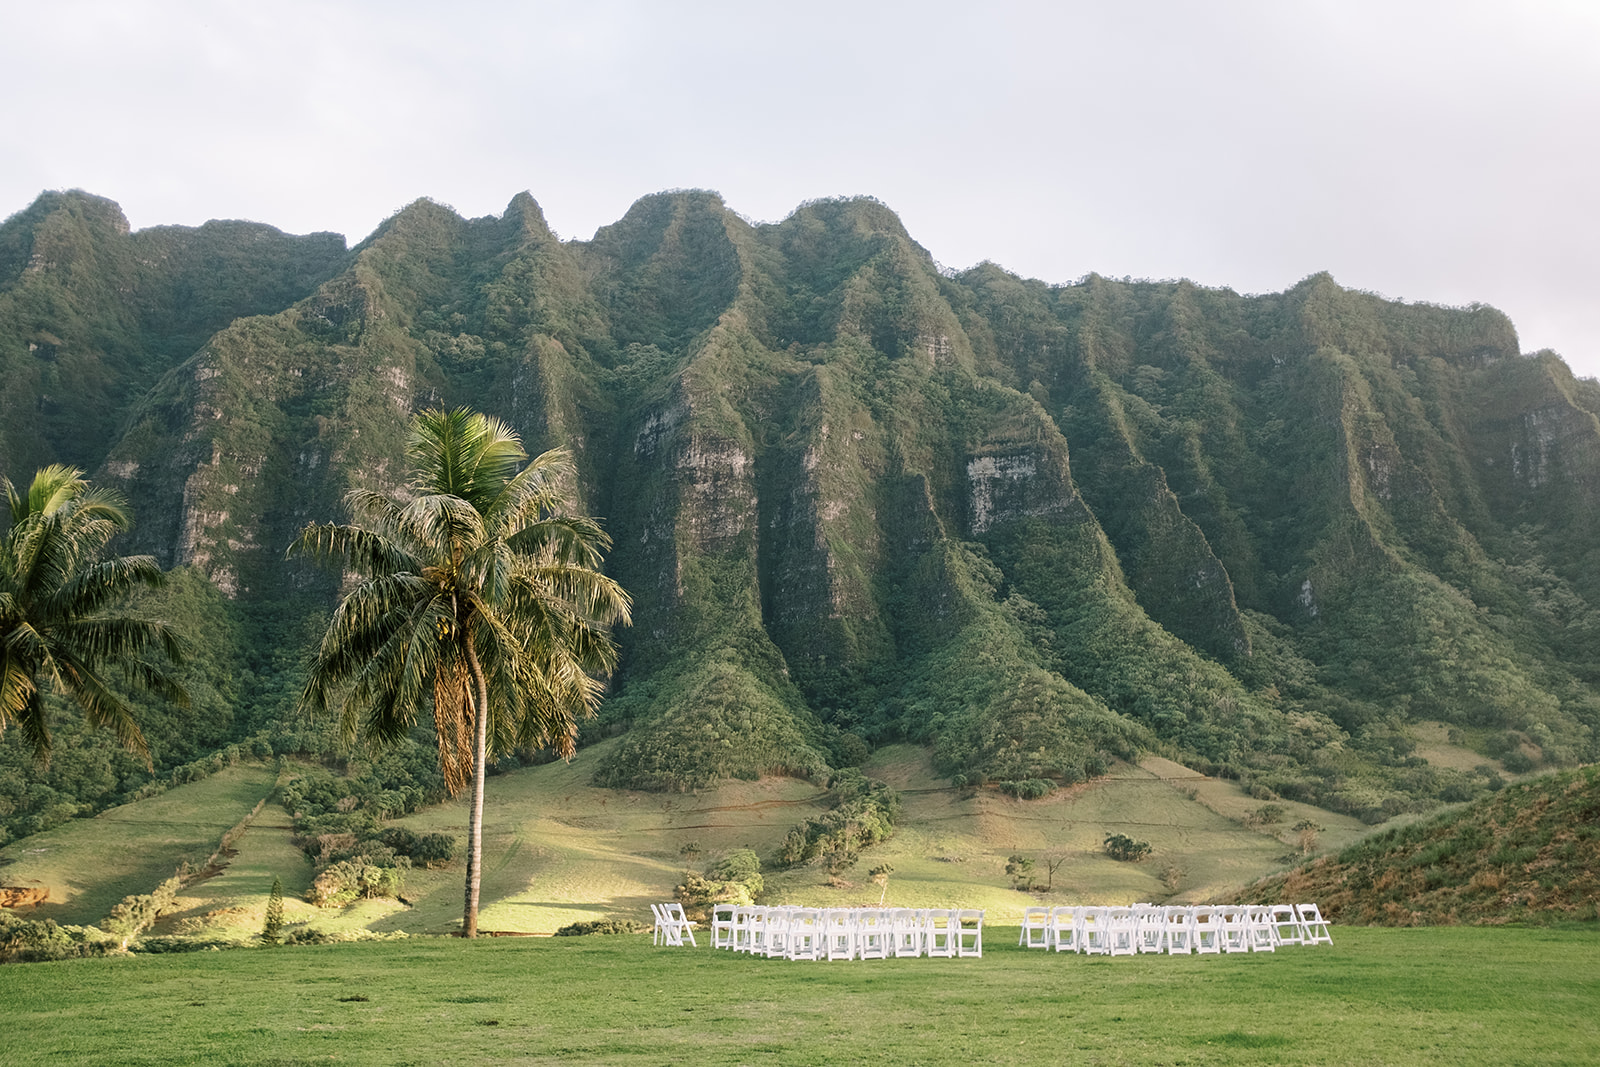 A destination wedding ceremony in front of a mountain at Kualoa Ranch, Hawaii.